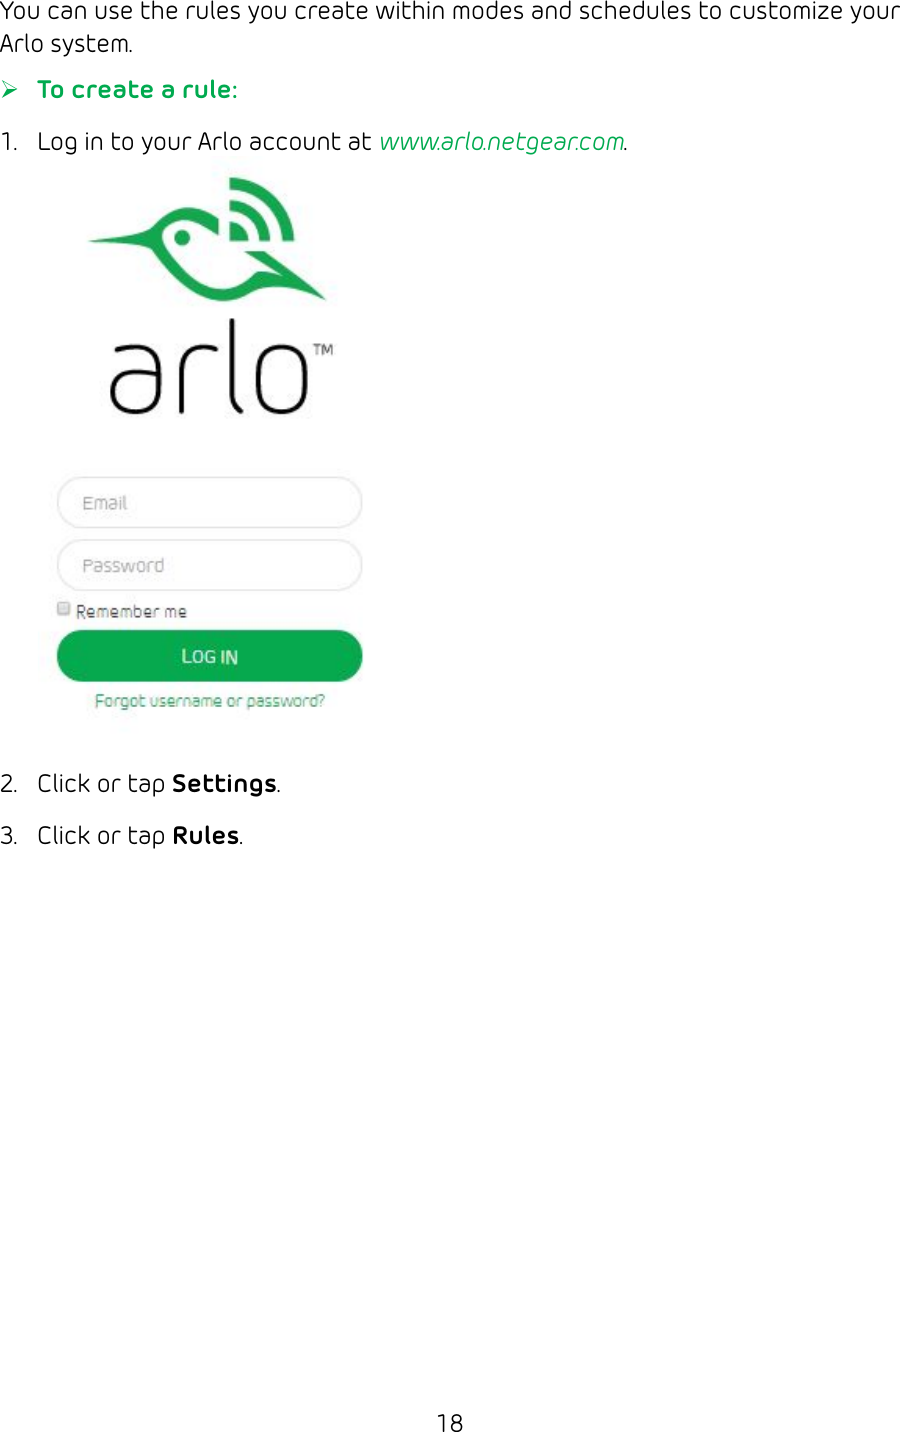 18You can use the rules you create within modes and schedules to customize your Arlo system. ¾To create a rule:1.  Log in to your Arlo account at www.arlo.netgear.com.2.  Click or tap Settings.3.  Click or tap Rules.